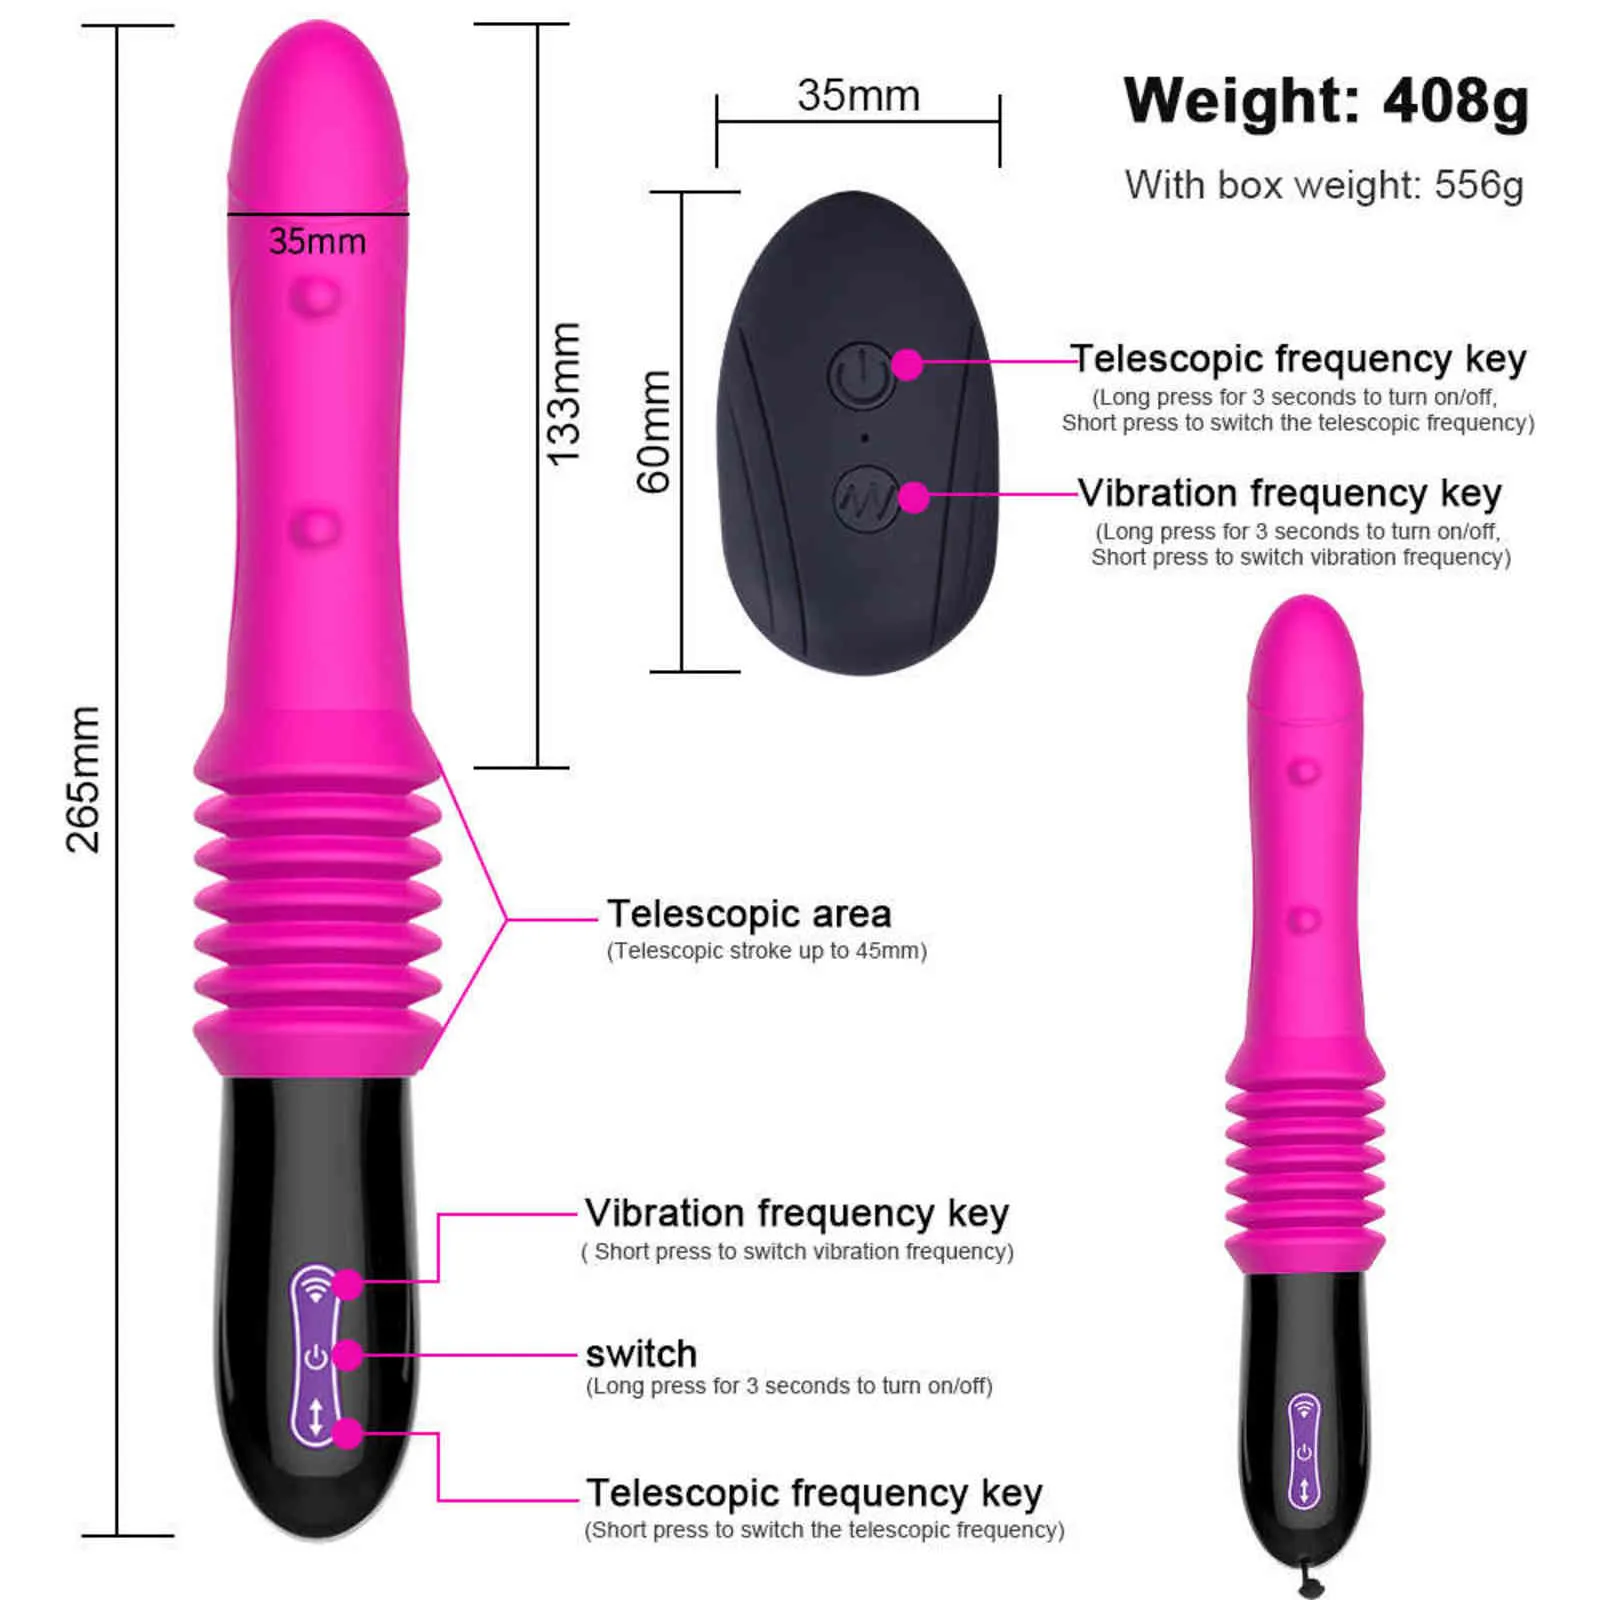 Nxy Vibrators Sex Thrusting Dildo Automatic g Spot Suction Game for Women Fun Anal Massage Orgasm 11092585492